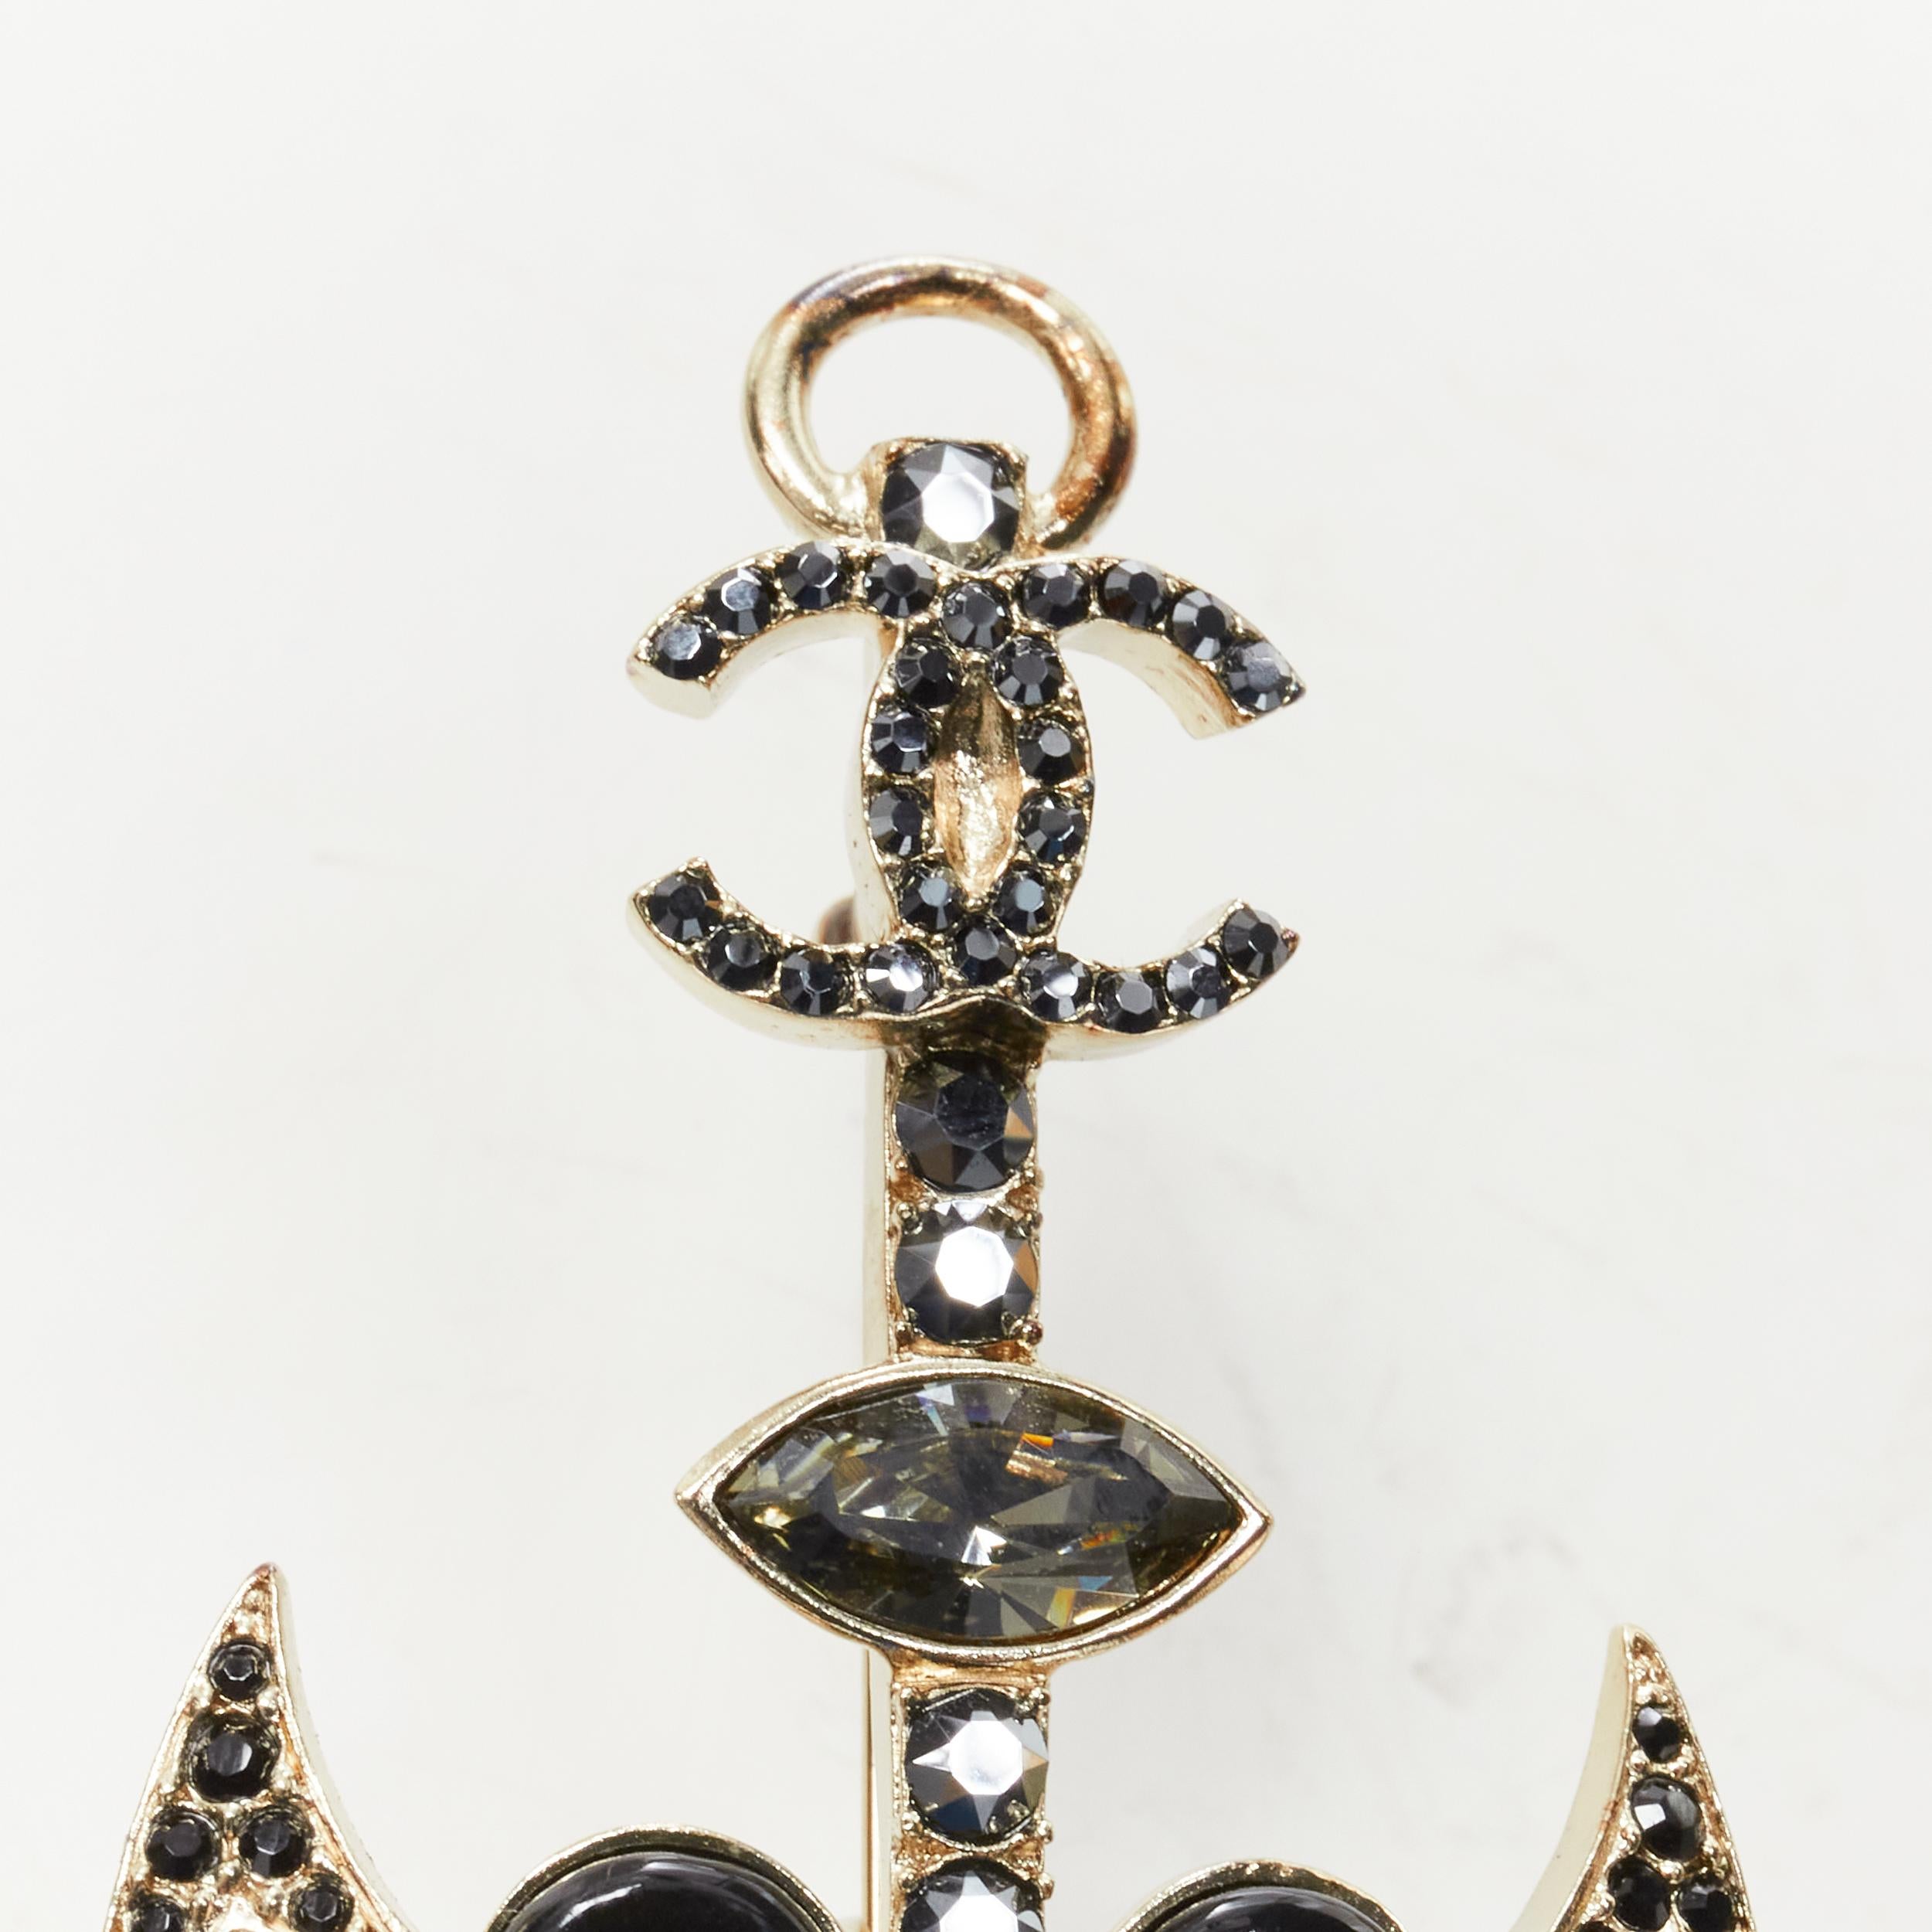 CHANEL Sailor Anchor navy black crystal rhinestone CC pin brooch
Brand: Chanel
Designer: Karl Lagerfeld
Material: Metal
Color: Navy
Pattern: Solid
Closure: Pin
Extra Detail: With hoop at top can be worn as pendant.
Made in: